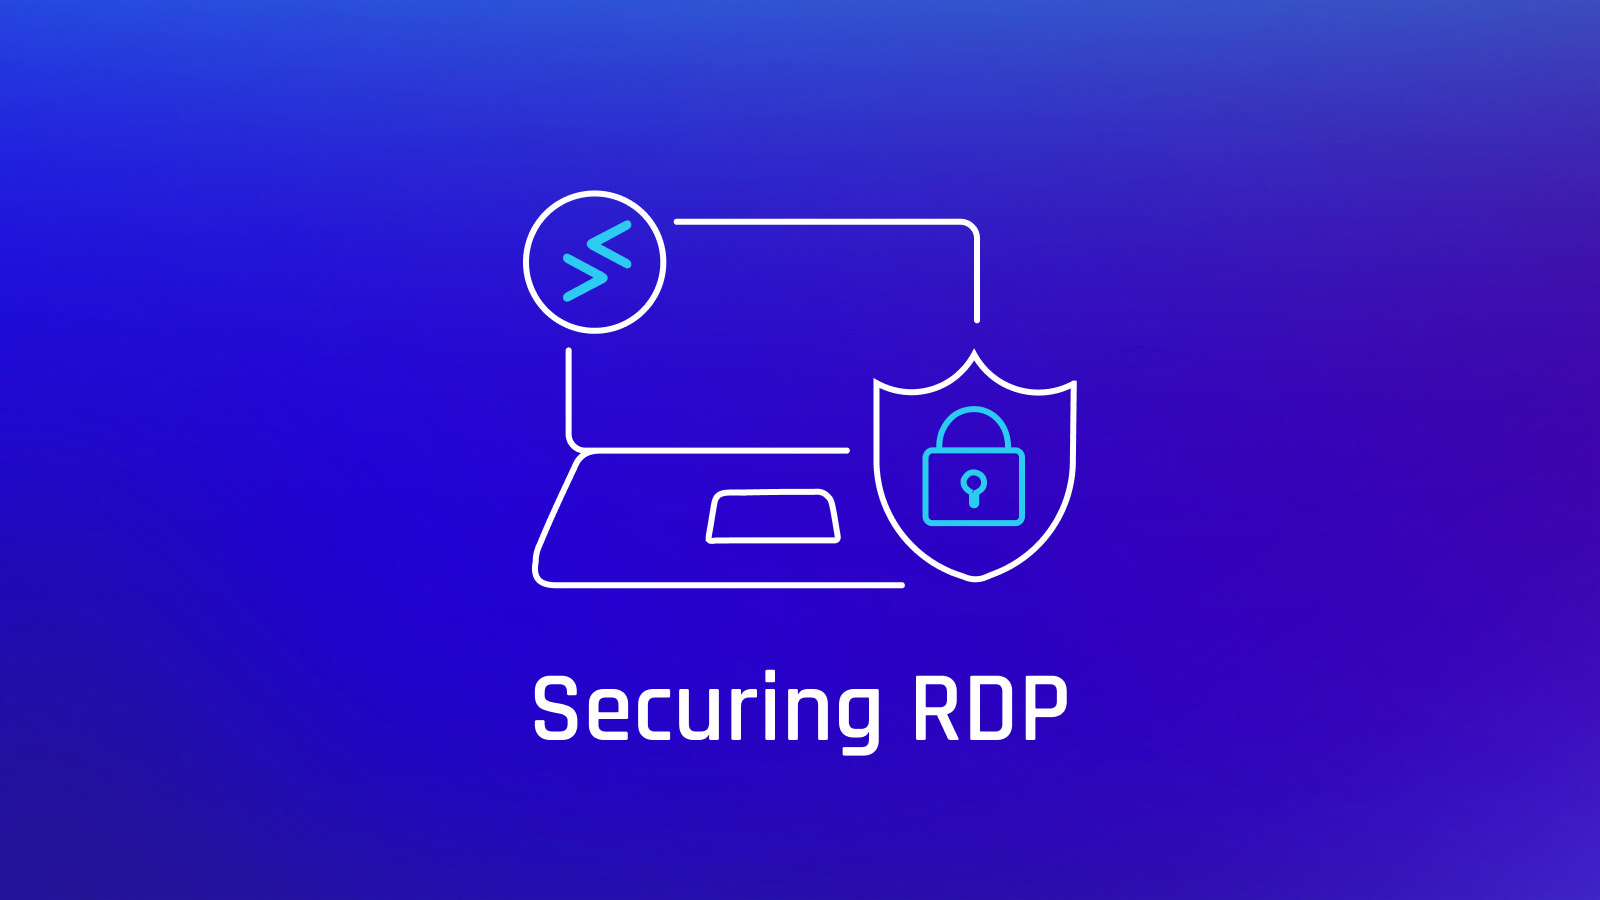 How to Secure RDP